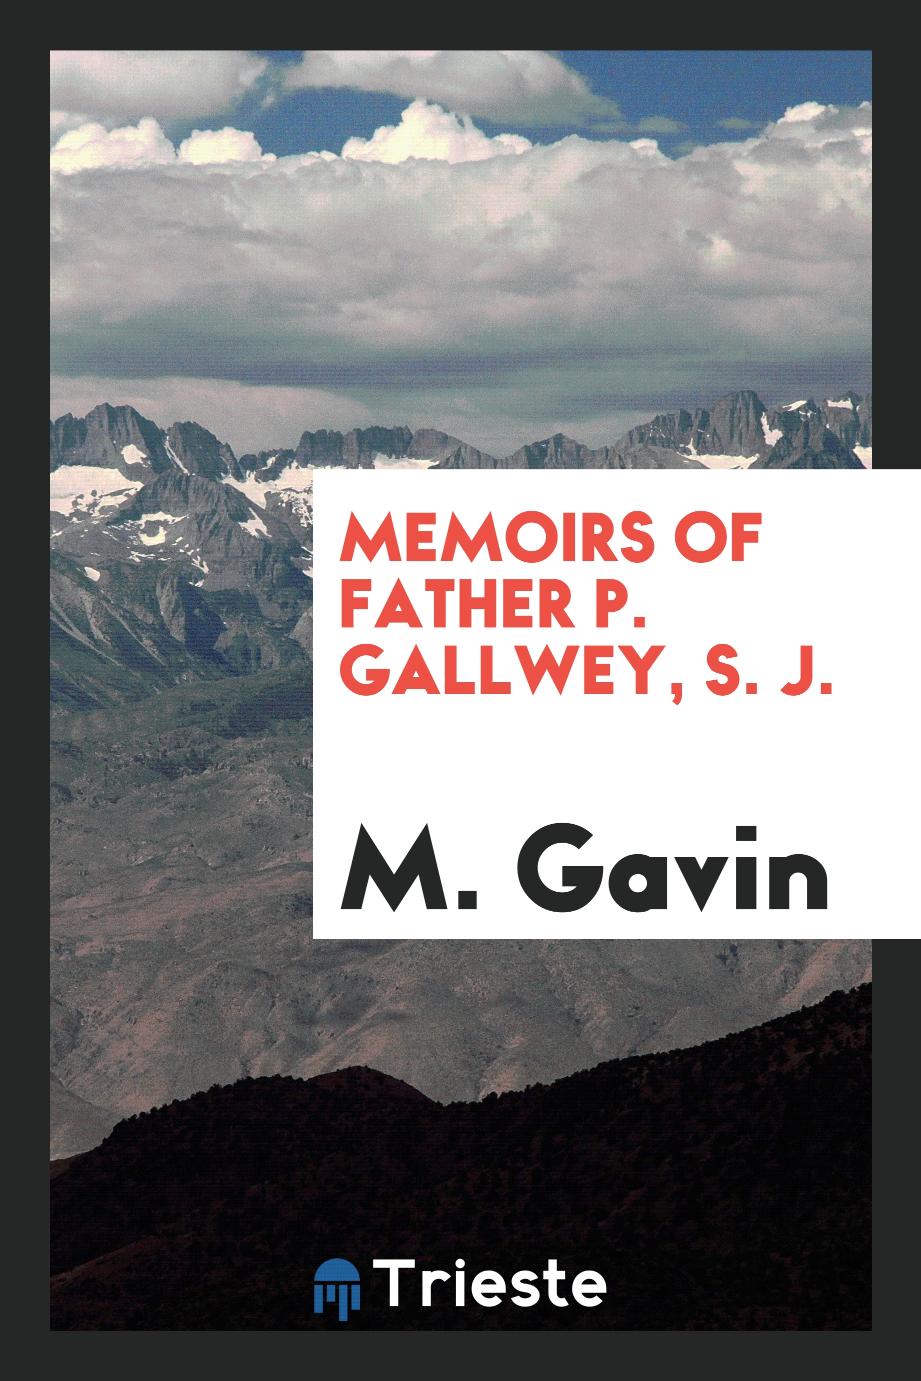 Memoirs of Father P. Gallwey, S. J.